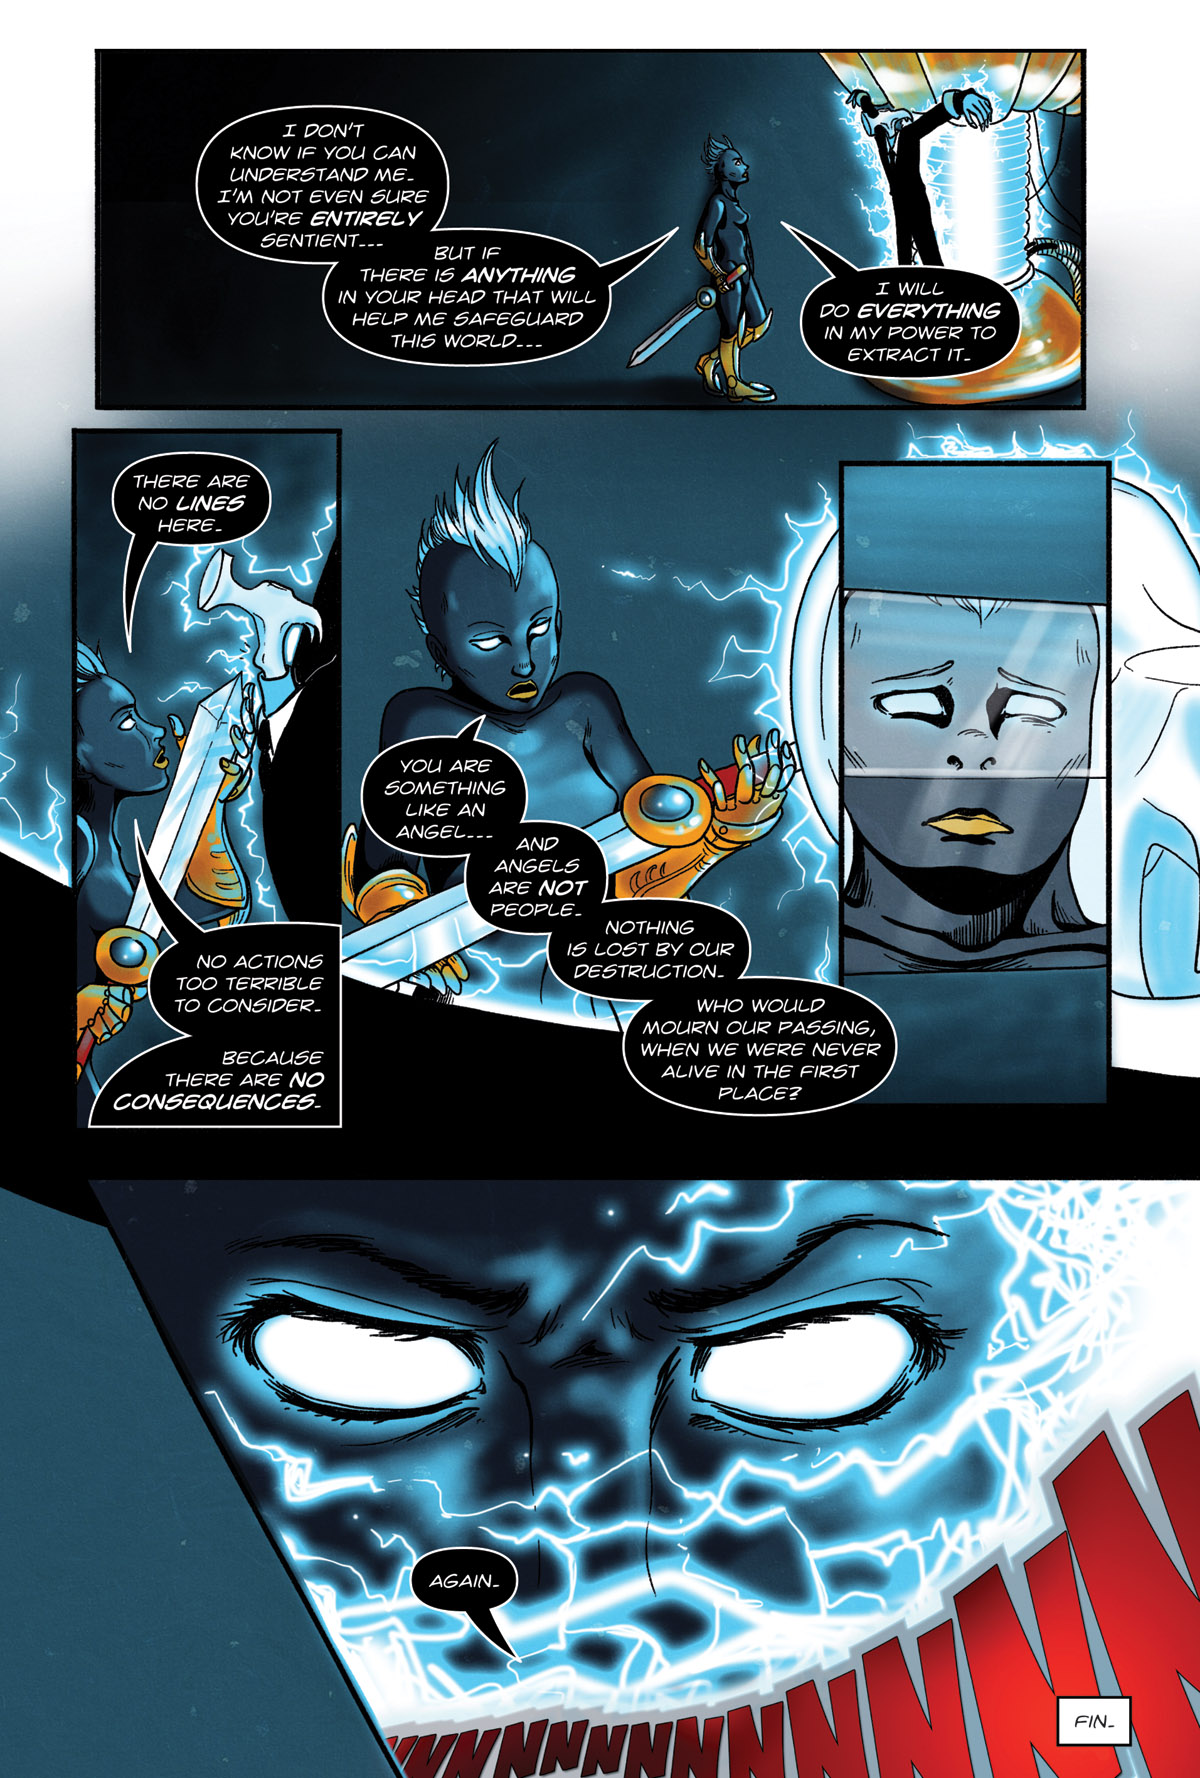 Afterlife Inc. | Dead Days | Lux | Page 4